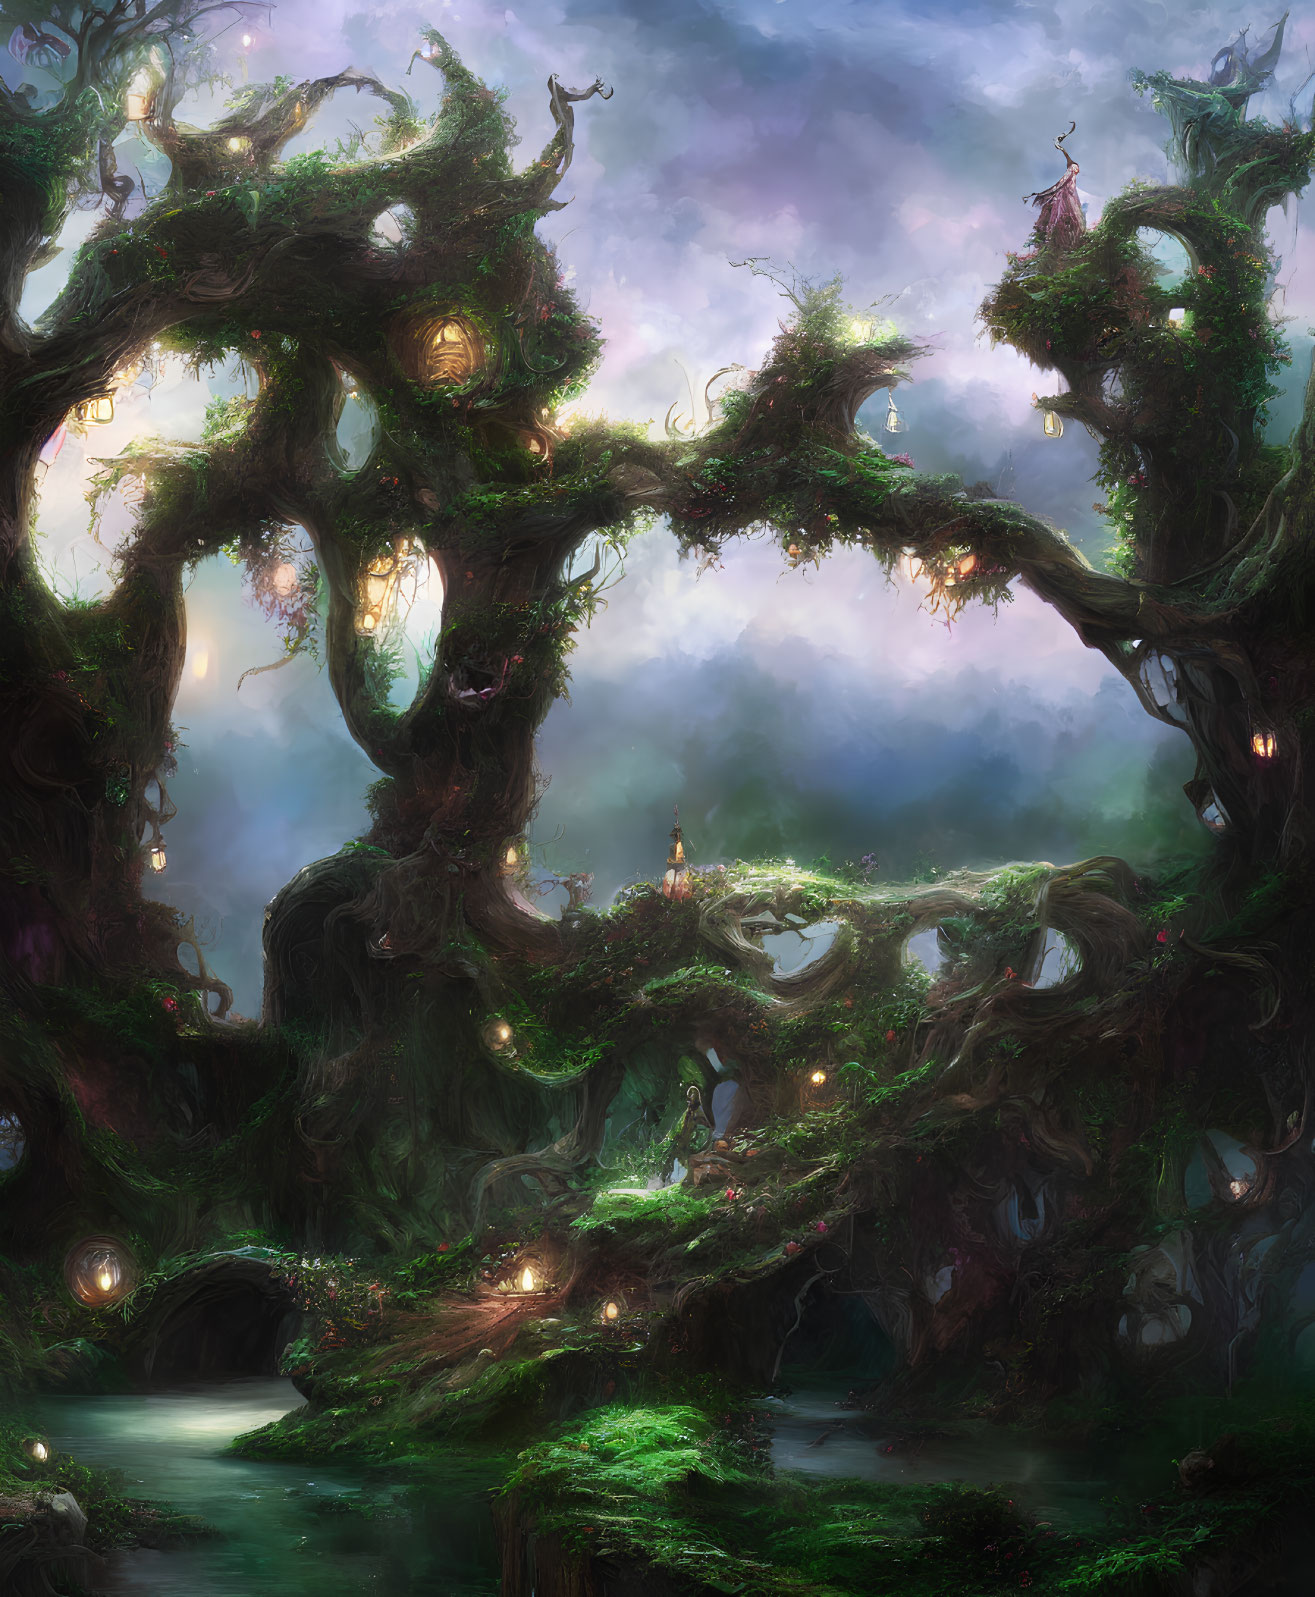 Enchanting forest with twisted trees, glowing orbs, and mystical sky